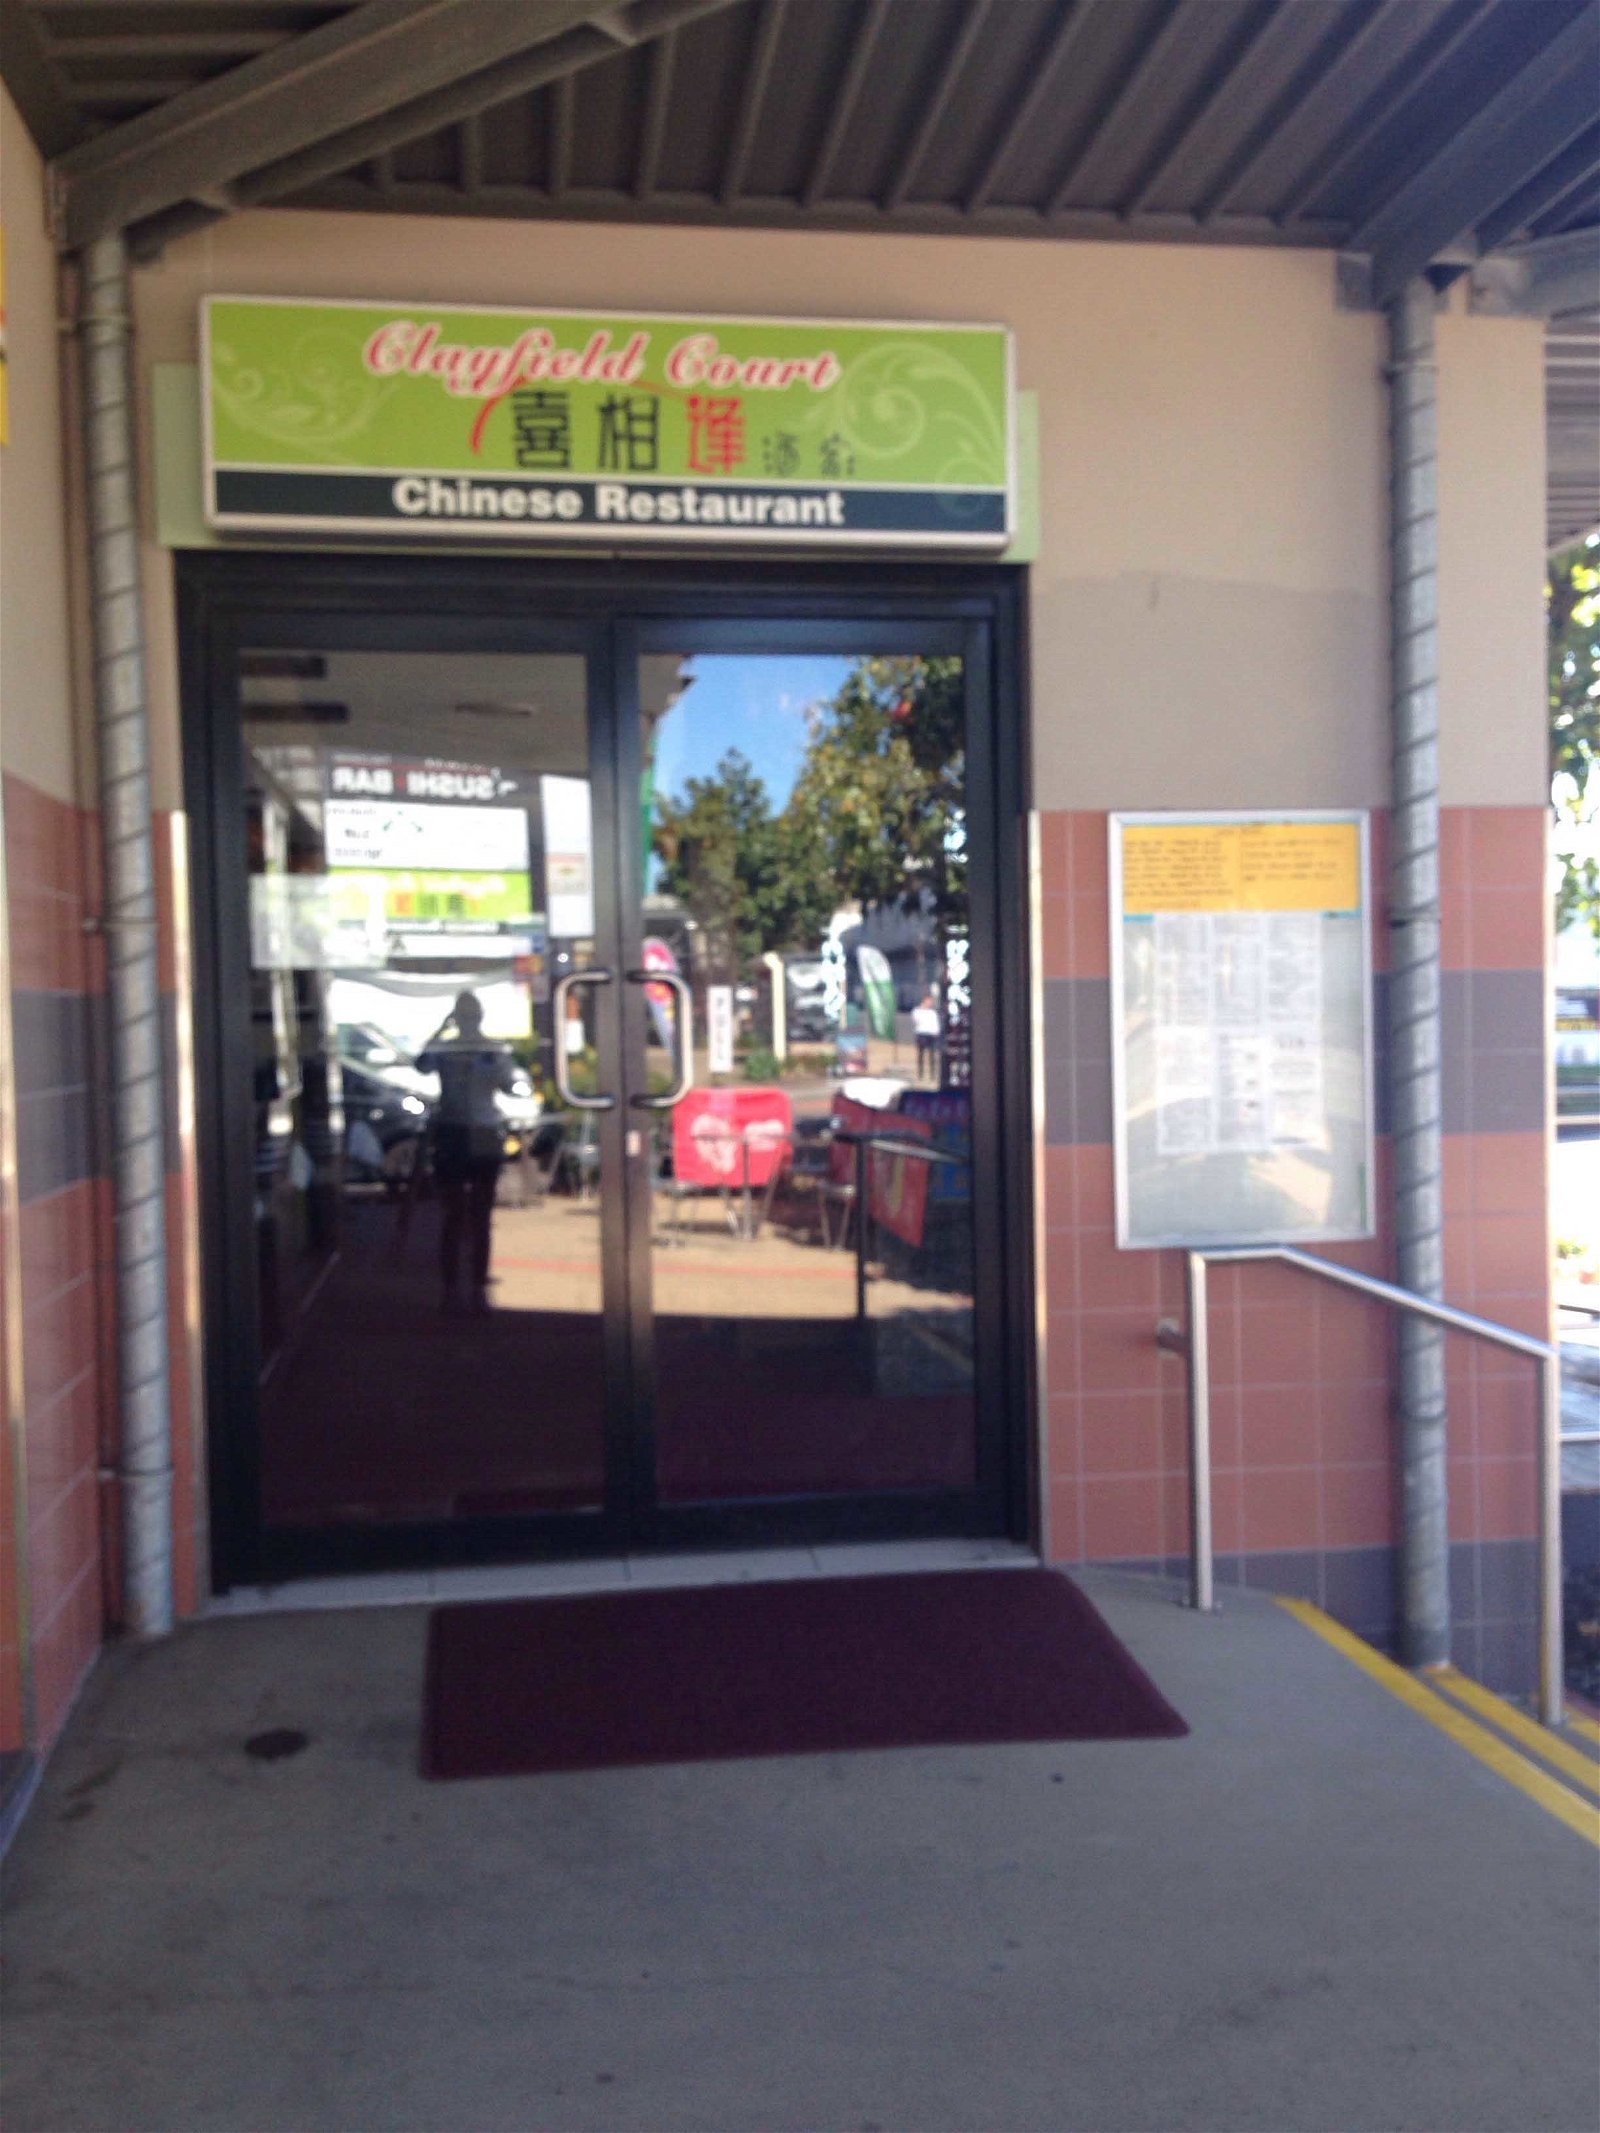 Clayfield Court Chinese Restaurant - Pubs and Clubs